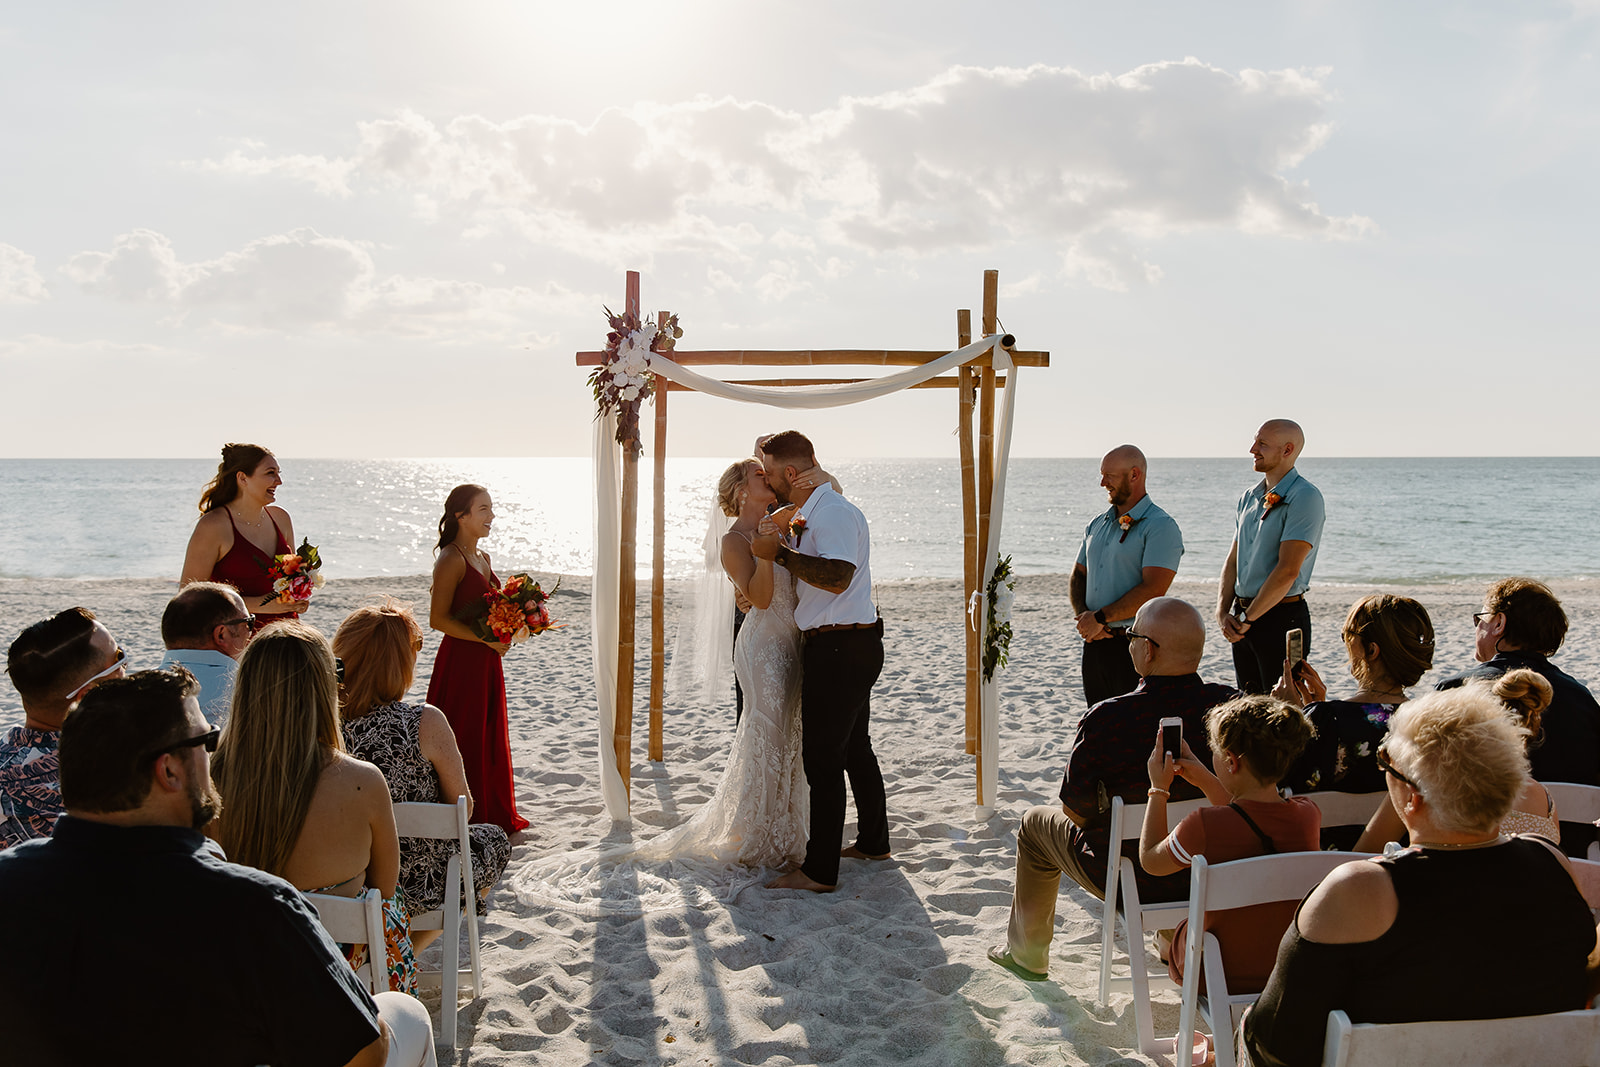 Bride and groom kiss in front of the arch during their ceremony on the beach